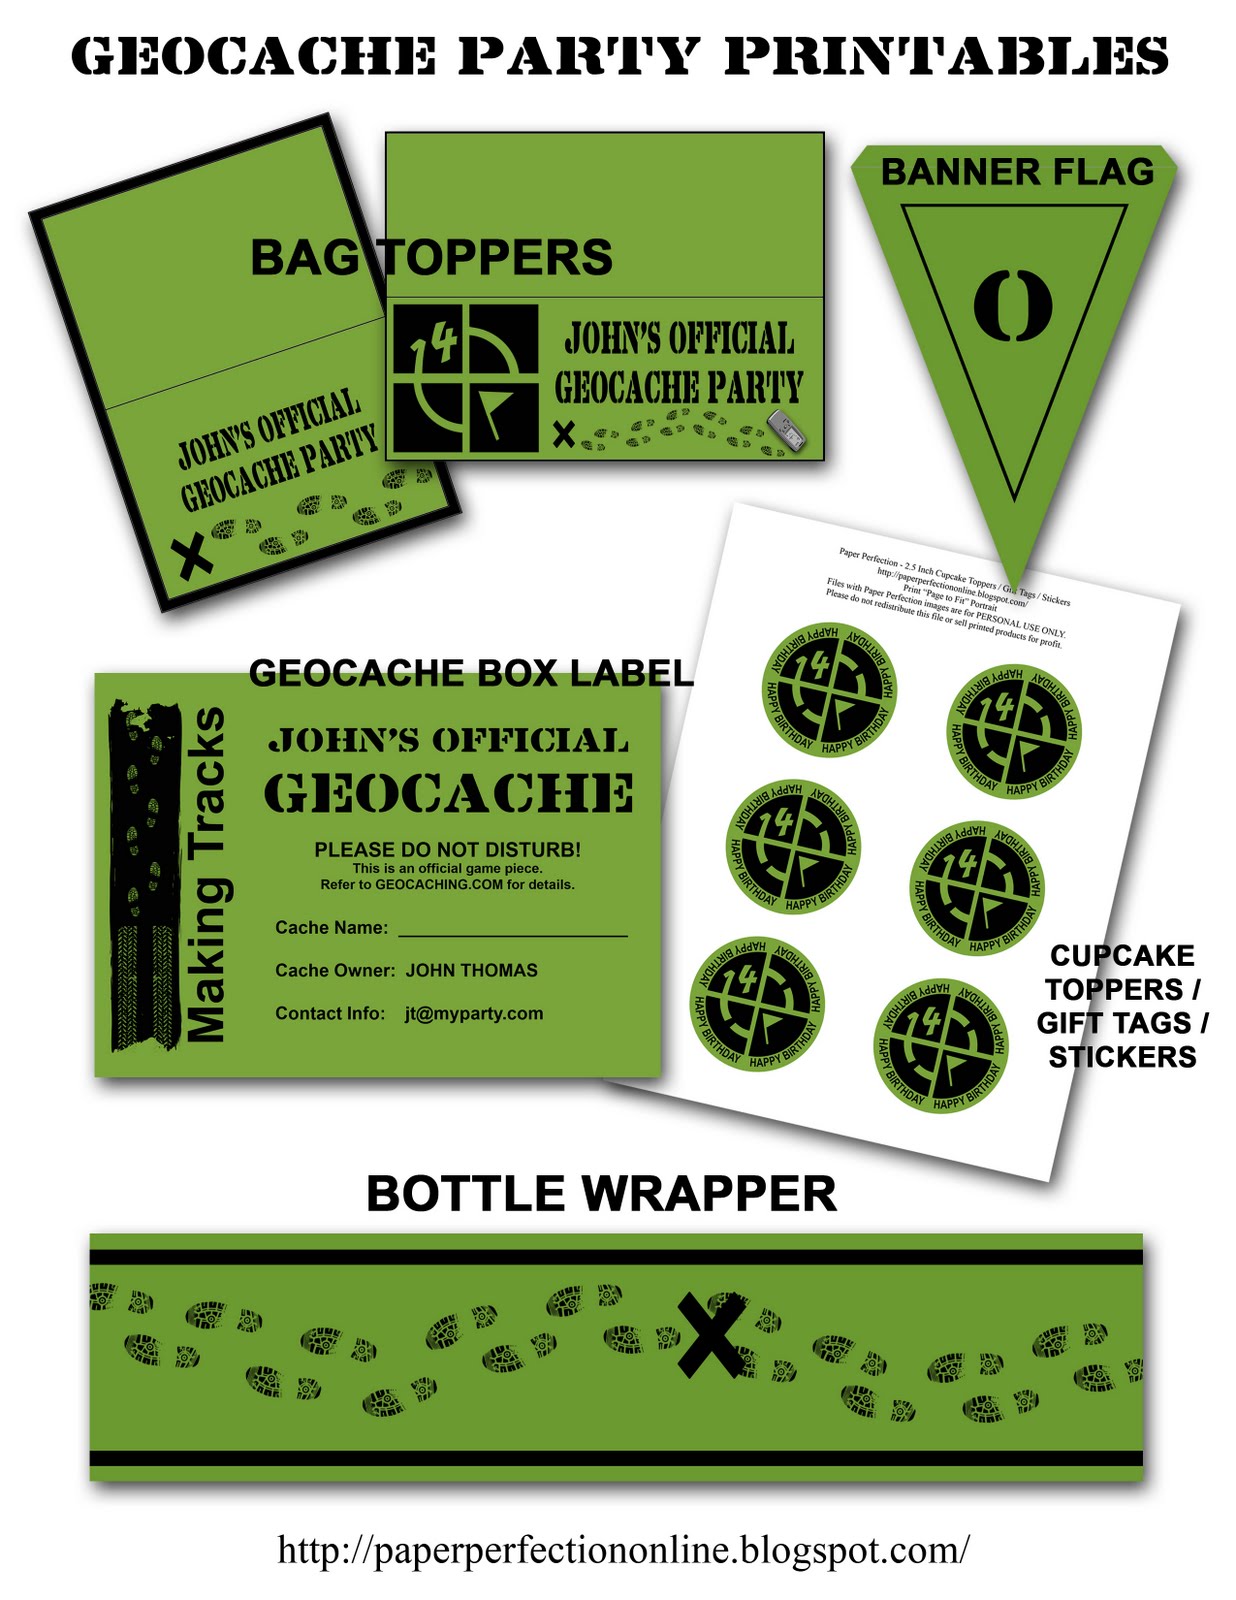 So You Want to Hide a Geocache: A Guide for Prospective Cache Owners